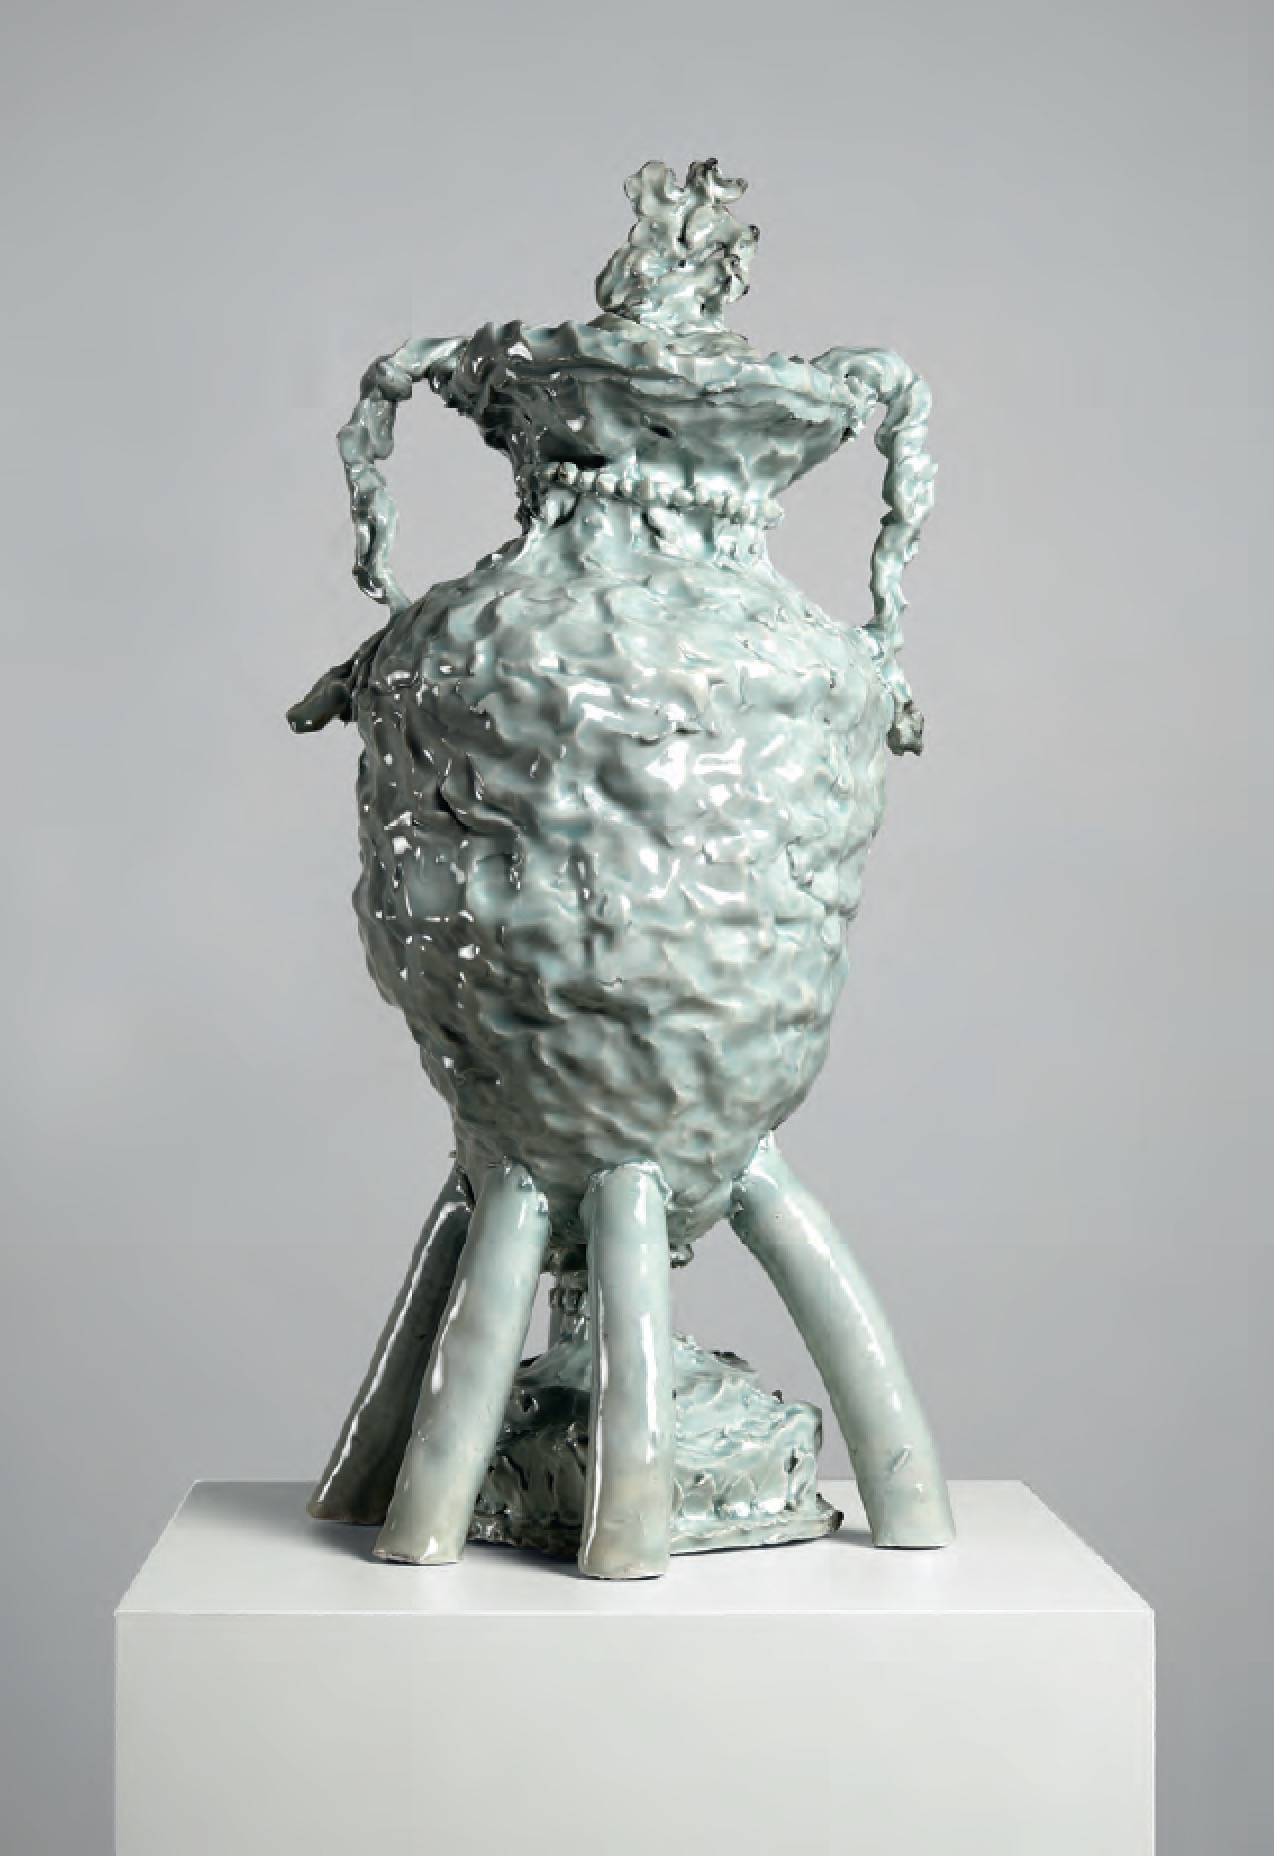 Jasperware vase and cover with Pegasus finial and with reliefs of Apollo and the Muses, made at the factory of Josiah Wedgwood,Etruria, Staffordshire, c.1790, 2016 Porcelain, celadon glaze - Jessica Harrison